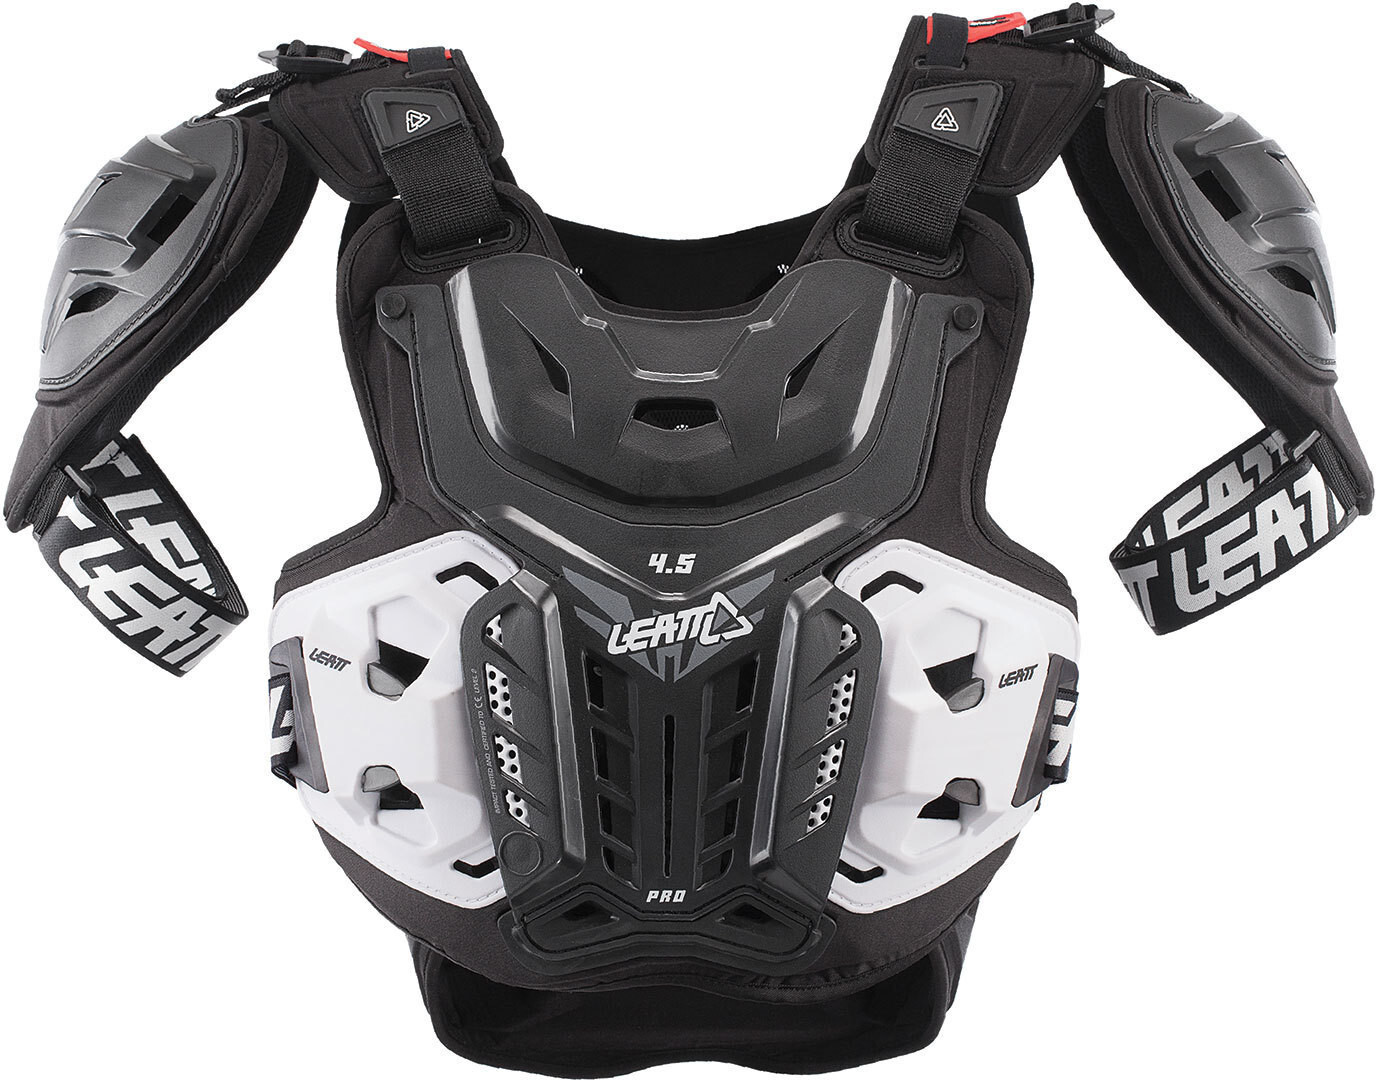 Photos - Motorcycle Clothing Leatt Chest protector 4.5 Pro black 